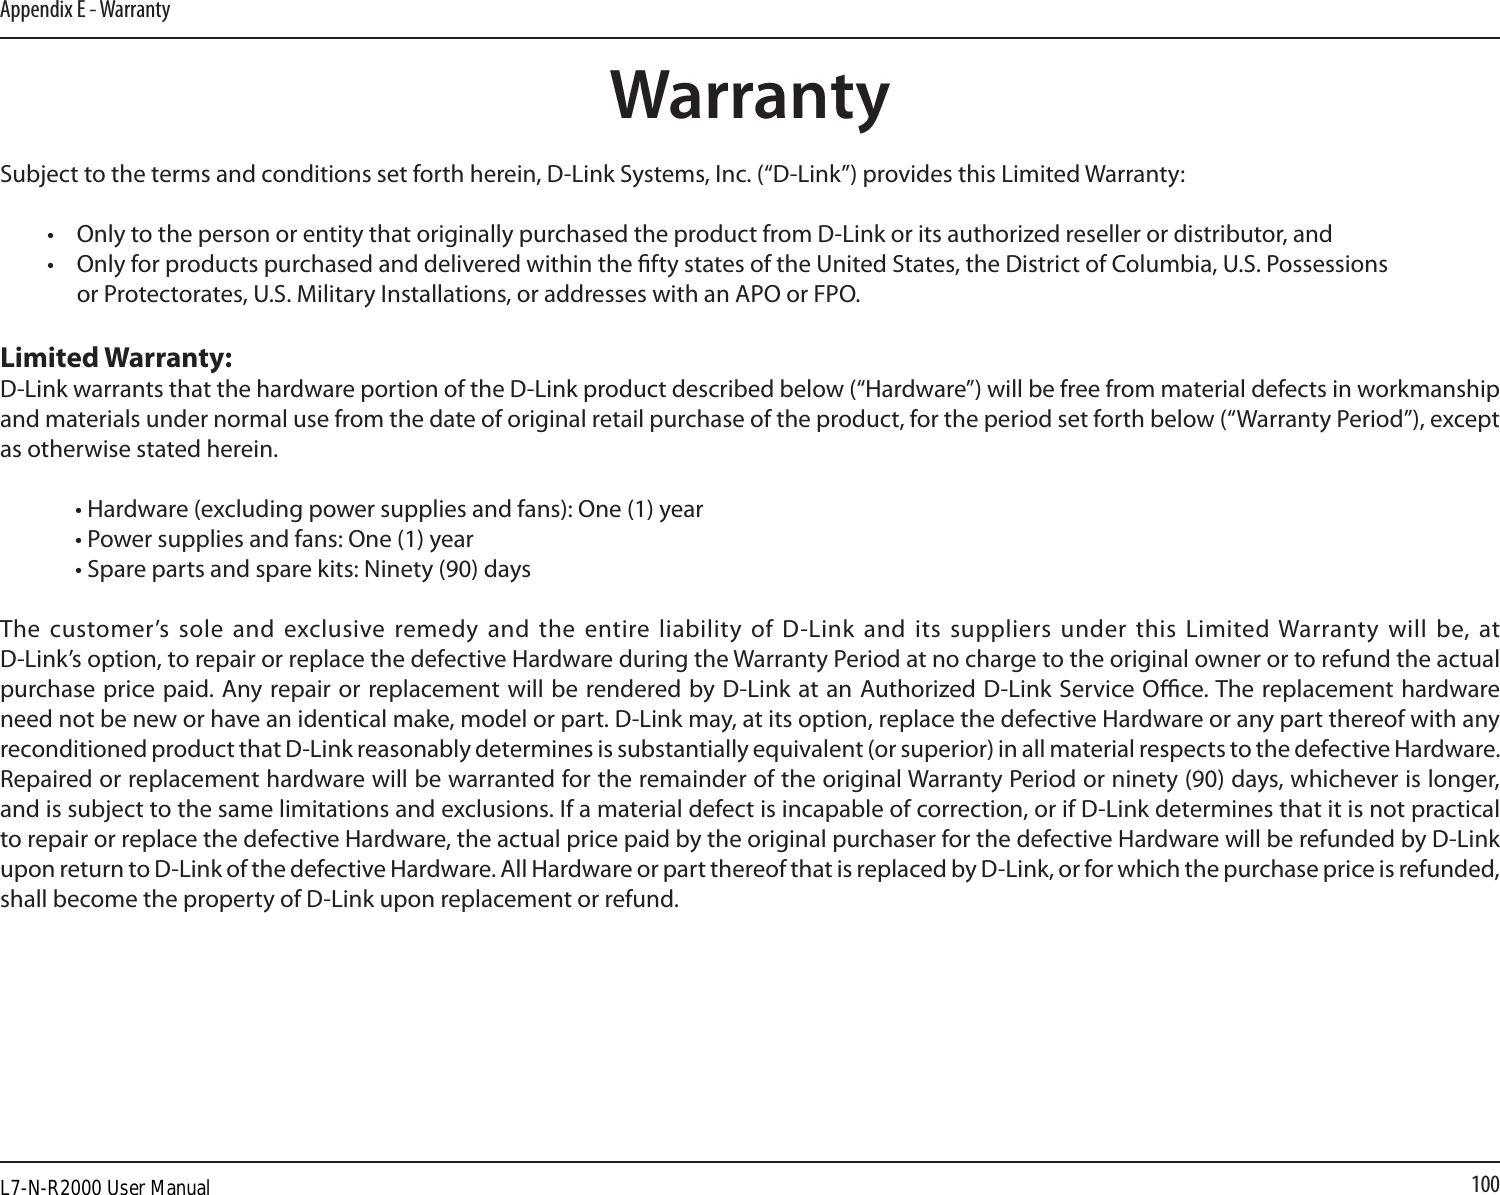 100Appendix E - WarrantyWarrantySubject to the terms and conditions set forth herein, D-Link Systems, Inc. (“D-Link”) provides this Limited Warranty:•  Only to the person or entity that originally purchased the product from D-Link or its authorized reseller or distributor, and•  Only for products purchased and delivered within the fty states of the United States, the District of Columbia, U.S. Possessions       or Protectorates, U.S. Military Installations, or addresses with an APO or FPO.Limited Warranty:D-Link warrants that the hardware portion of the D-Link product described below (“Hardware”) will be free from material defects in workmanship and materials under normal use from the date of original retail purchase of the product, for the period set forth below (“Warranty Period”), except as otherwise stated herein.  • Hardware (excluding power supplies and fans): One (1) year  • Power supplies and fans: One (1) year  • Spare parts and spare kits: Ninety (90) daysThe customer’s sole  and exclusive remedy and  the entire liability  of D-Link  and its suppliers under this  Limited Warranty will  be, at  D-Link’s option, to repair or replace the defective Hardware during the Warranty Period at no charge to the original owner or to refund the actual purchase price paid. Any repair or replacement will be rendered by D-Link at an Authorized D-Link Service Oce. The replacement hardware need not be new or have an identical make, model or part. D-Link may, at its option, replace the defective Hardware or any part thereof with any reconditioned product that D-Link reasonably determines is substantially equivalent (or superior) in all material respects to the defective Hardware. Repaired or replacement hardware will be warranted for the remainder of the original Warranty Period or ninety (90) days, whichever is longer, and is subject to the same limitations and exclusions. If a material defect is incapable of correction, or if D-Link determines that it is not practical to repair or replace the defective Hardware, the actual price paid by the original purchaser for the defective Hardware will be refunded by D-Link upon return to D-Link of the defective Hardware. All Hardware or part thereof that is replaced by D-Link, or for which the purchase price is refunded, shall become the property of D-Link upon replacement or refund.L7-N-R2000 User Manual